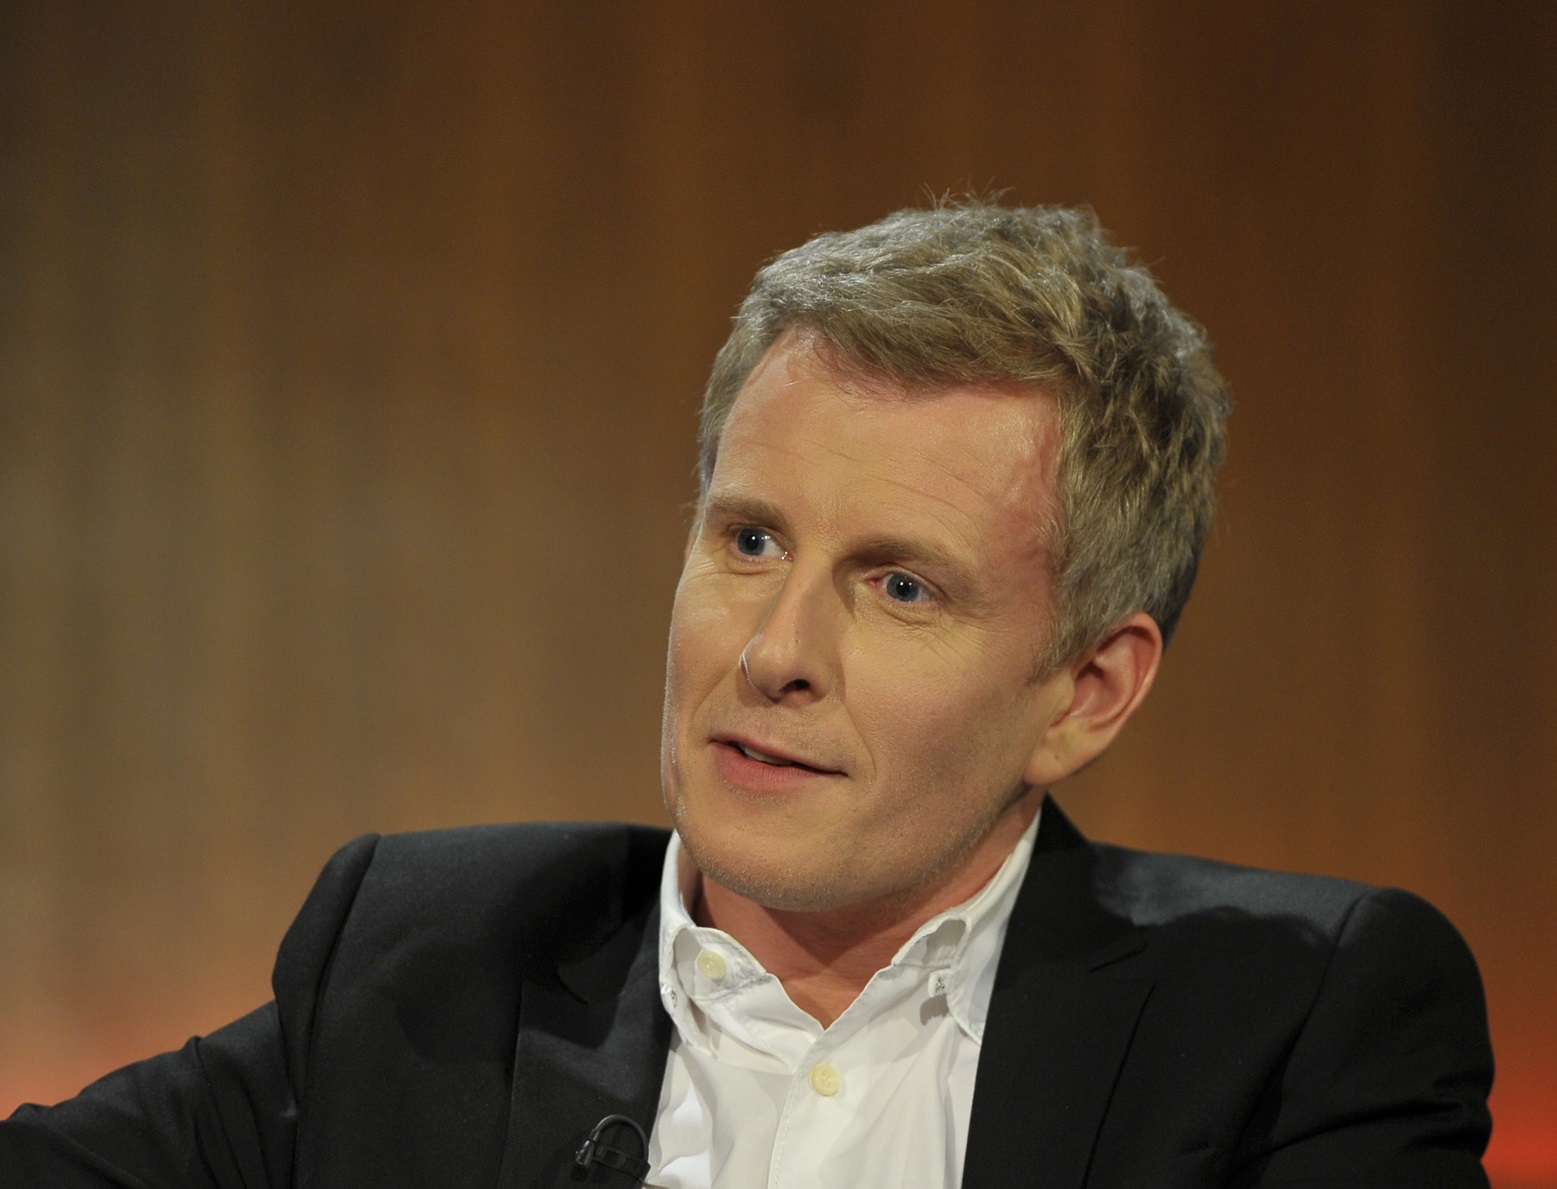 Patrick Kielty during the 50th anniversary Late Late Show.